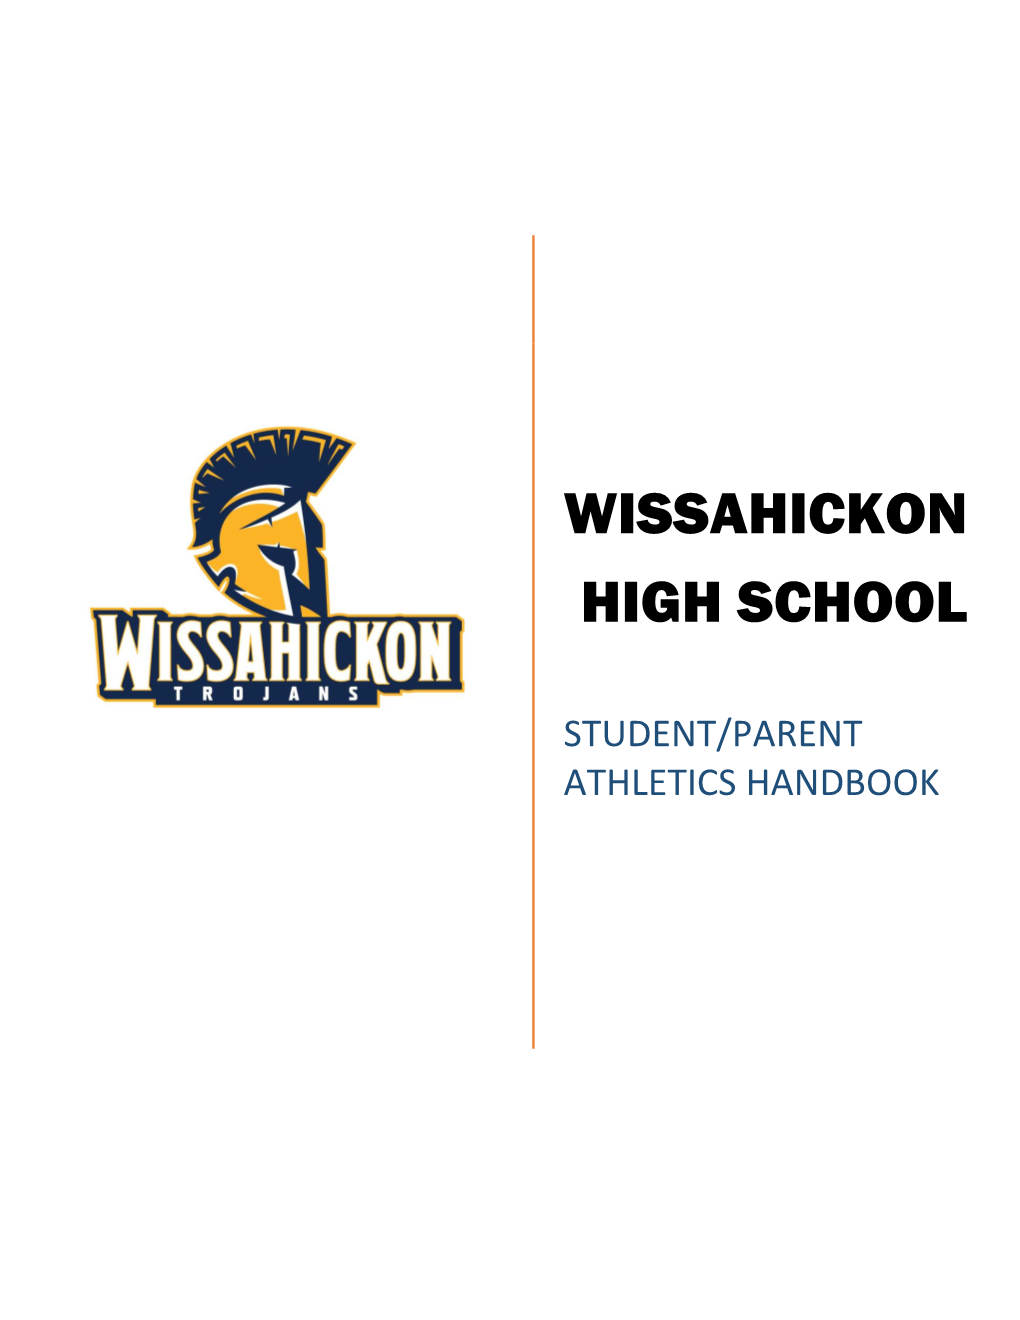 Wissahickon High School Is a Participating Member of the Pennsylvania Interscholastic Athletic Association (PIAA)